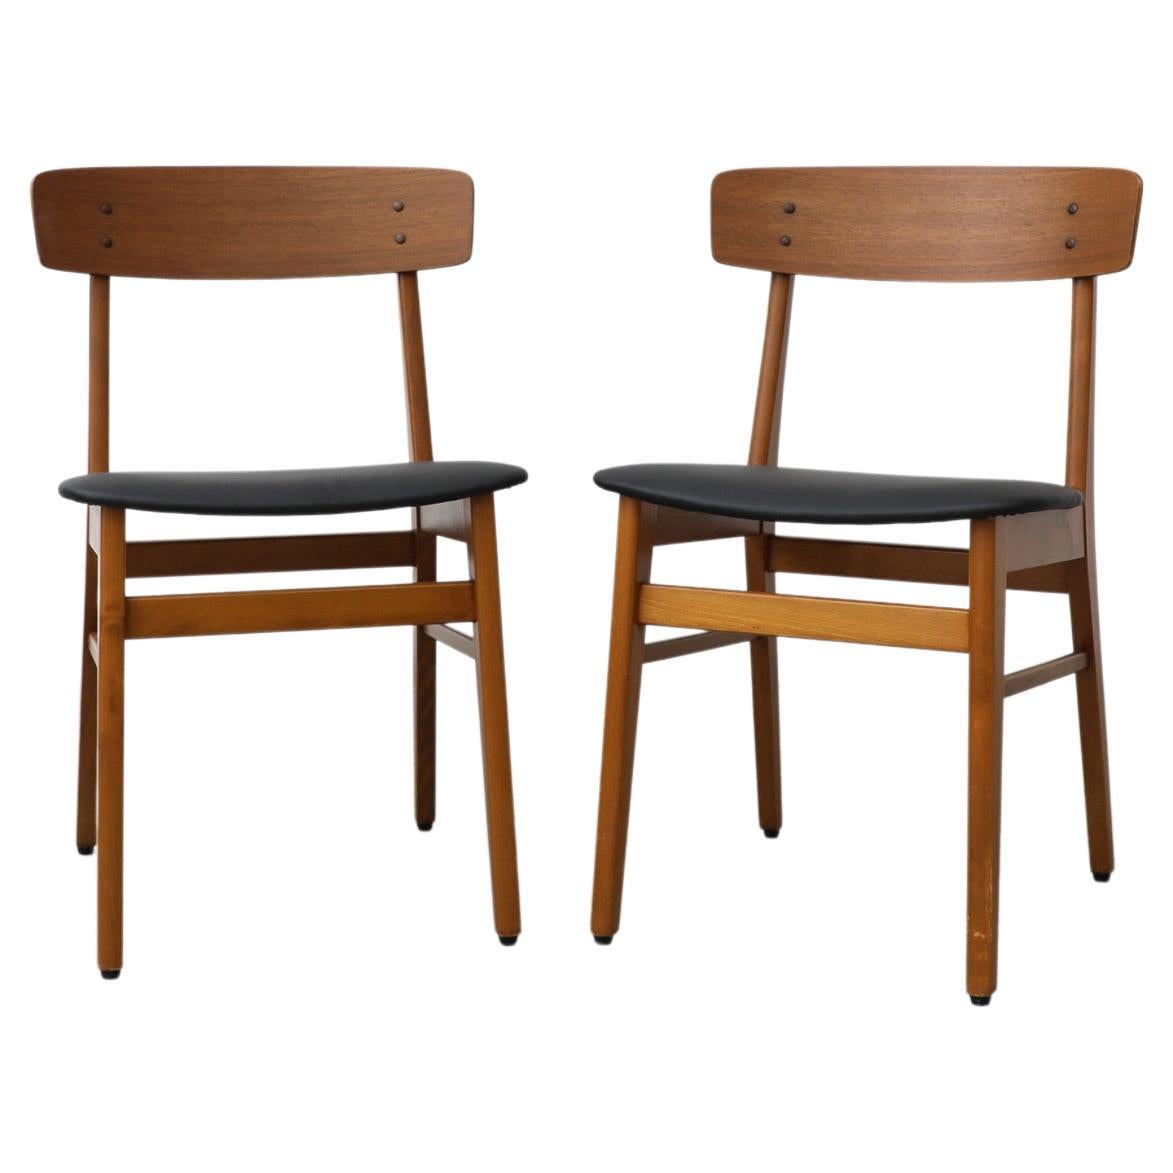 Pair of Borge Mogensen Style Danish Chairs by Farstrup with Black Skai Seats